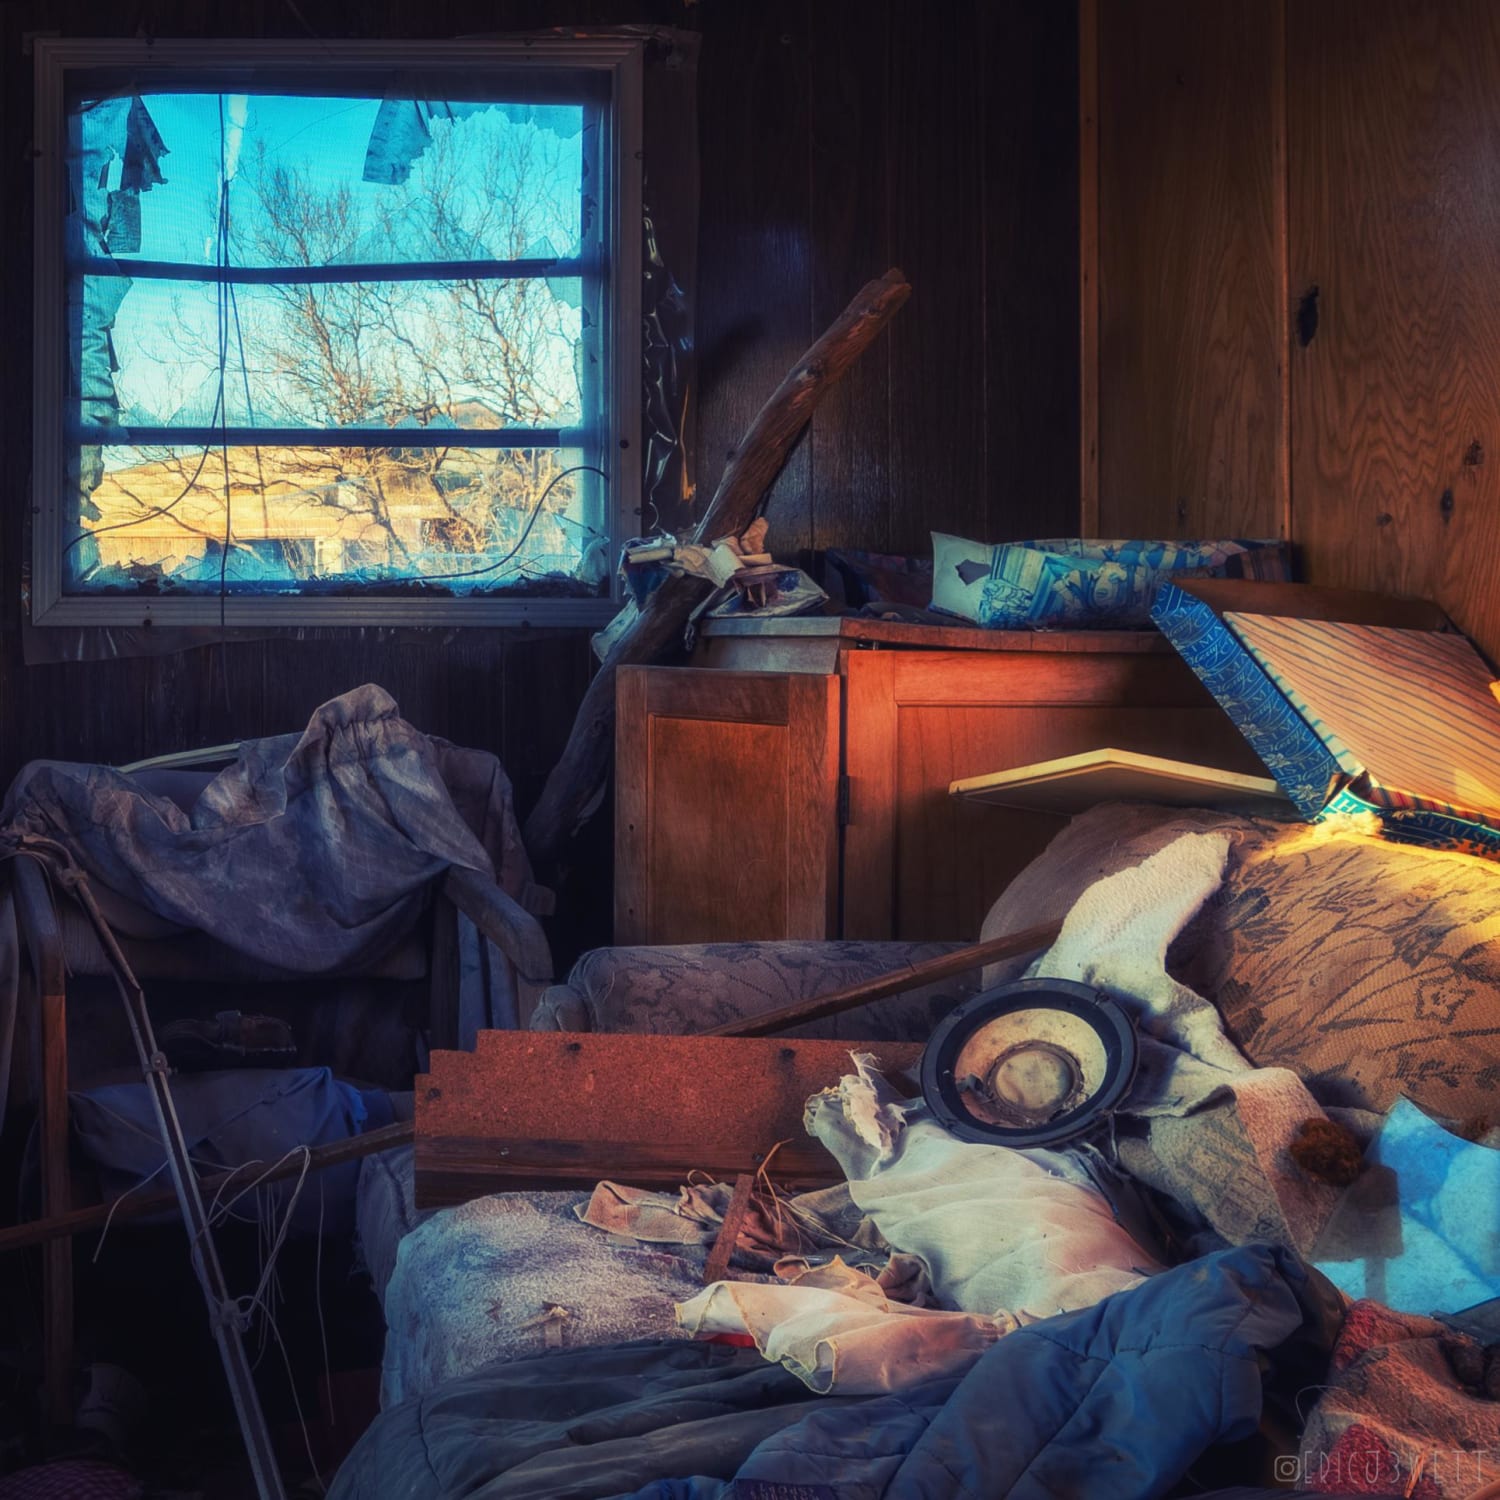 Abandoned Trailer - Like a still life painting.